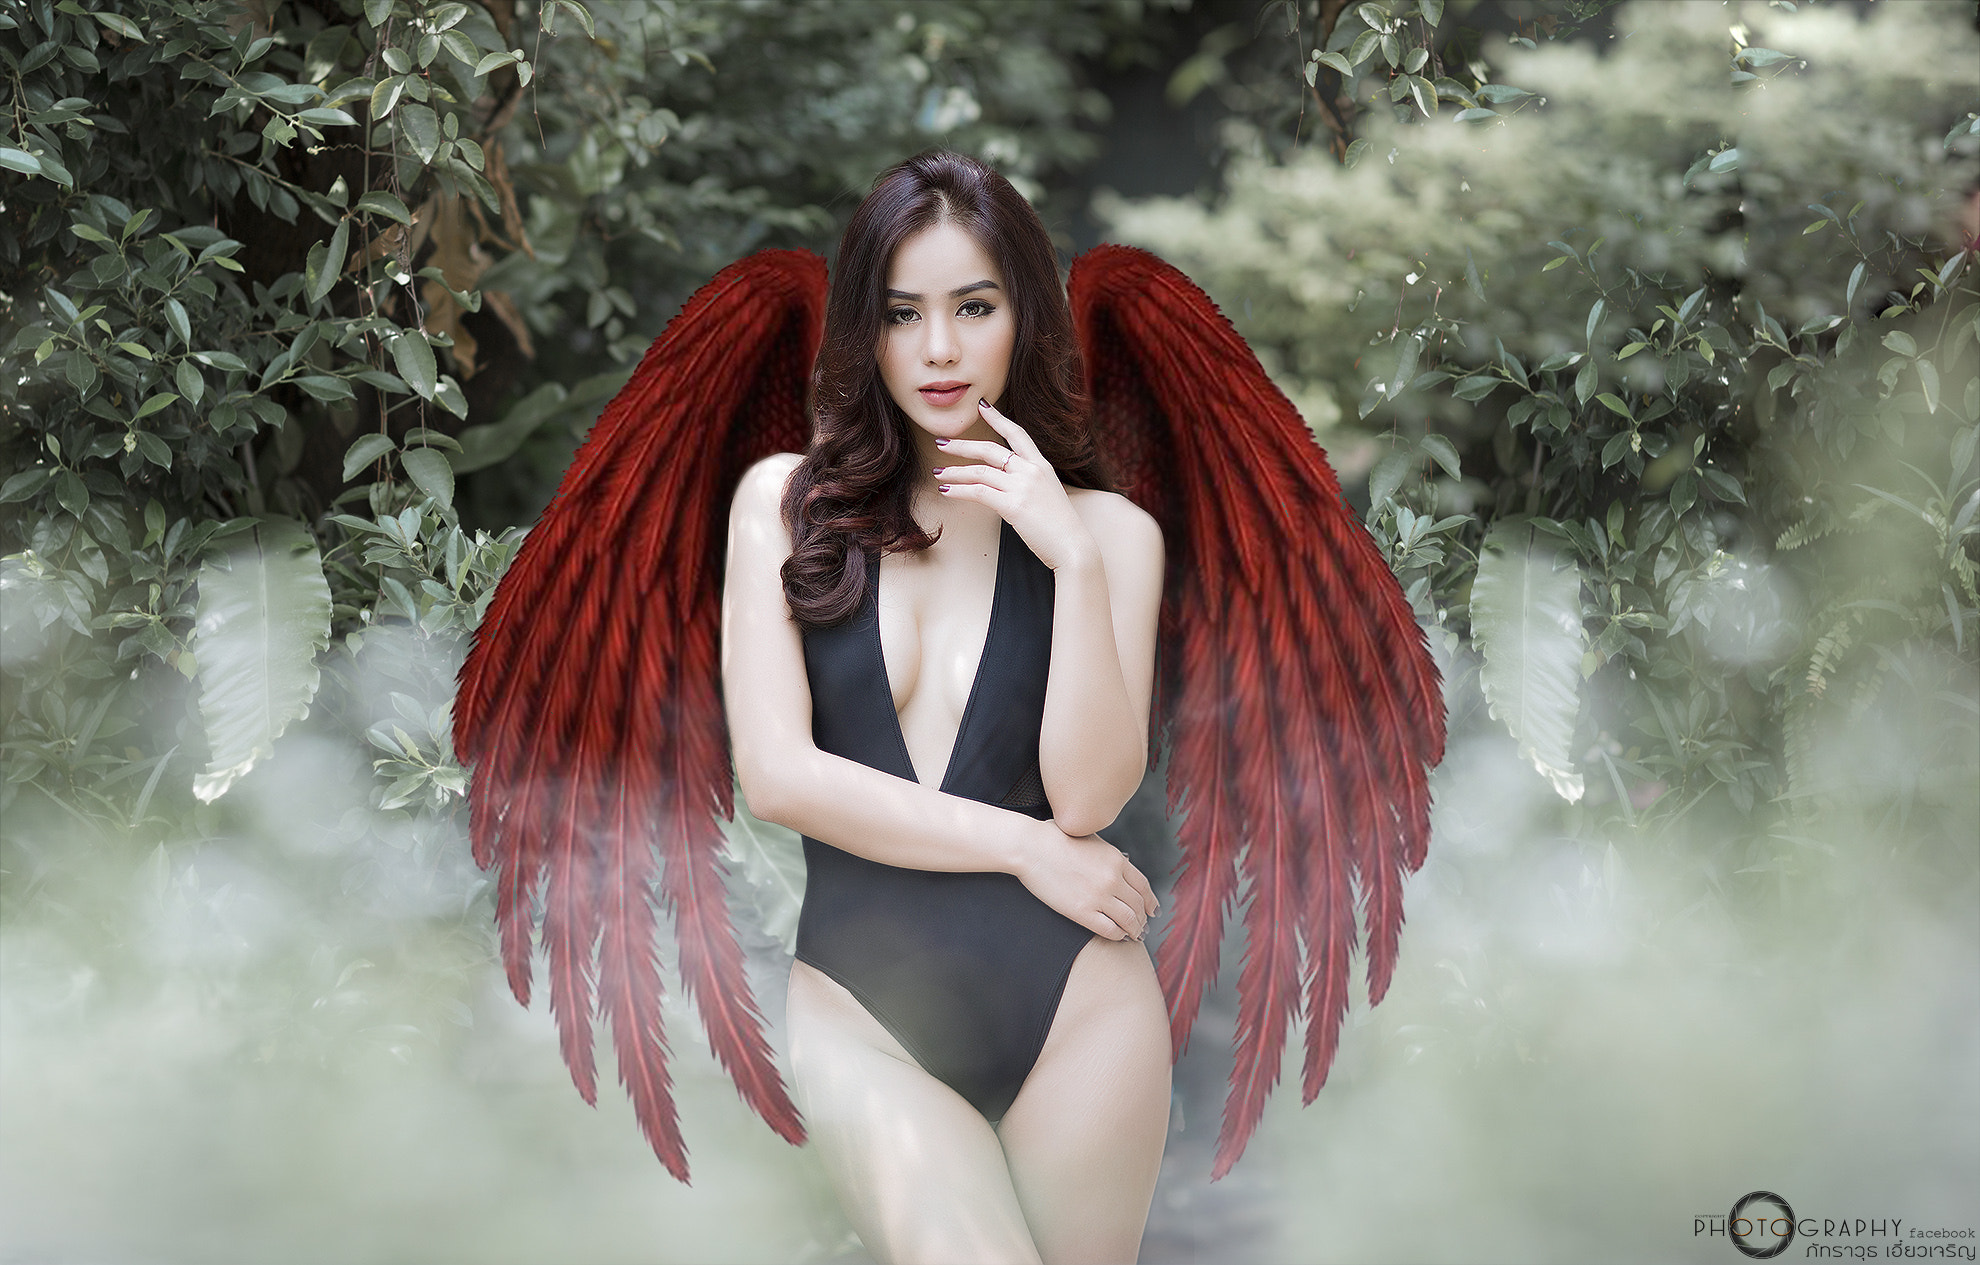 People 1980x1265 women wings fantasy girl bodysuit standing model looking at viewer smoke women outdoors outdoors long hair redhead dyed hair painted nails plants leaves makeup